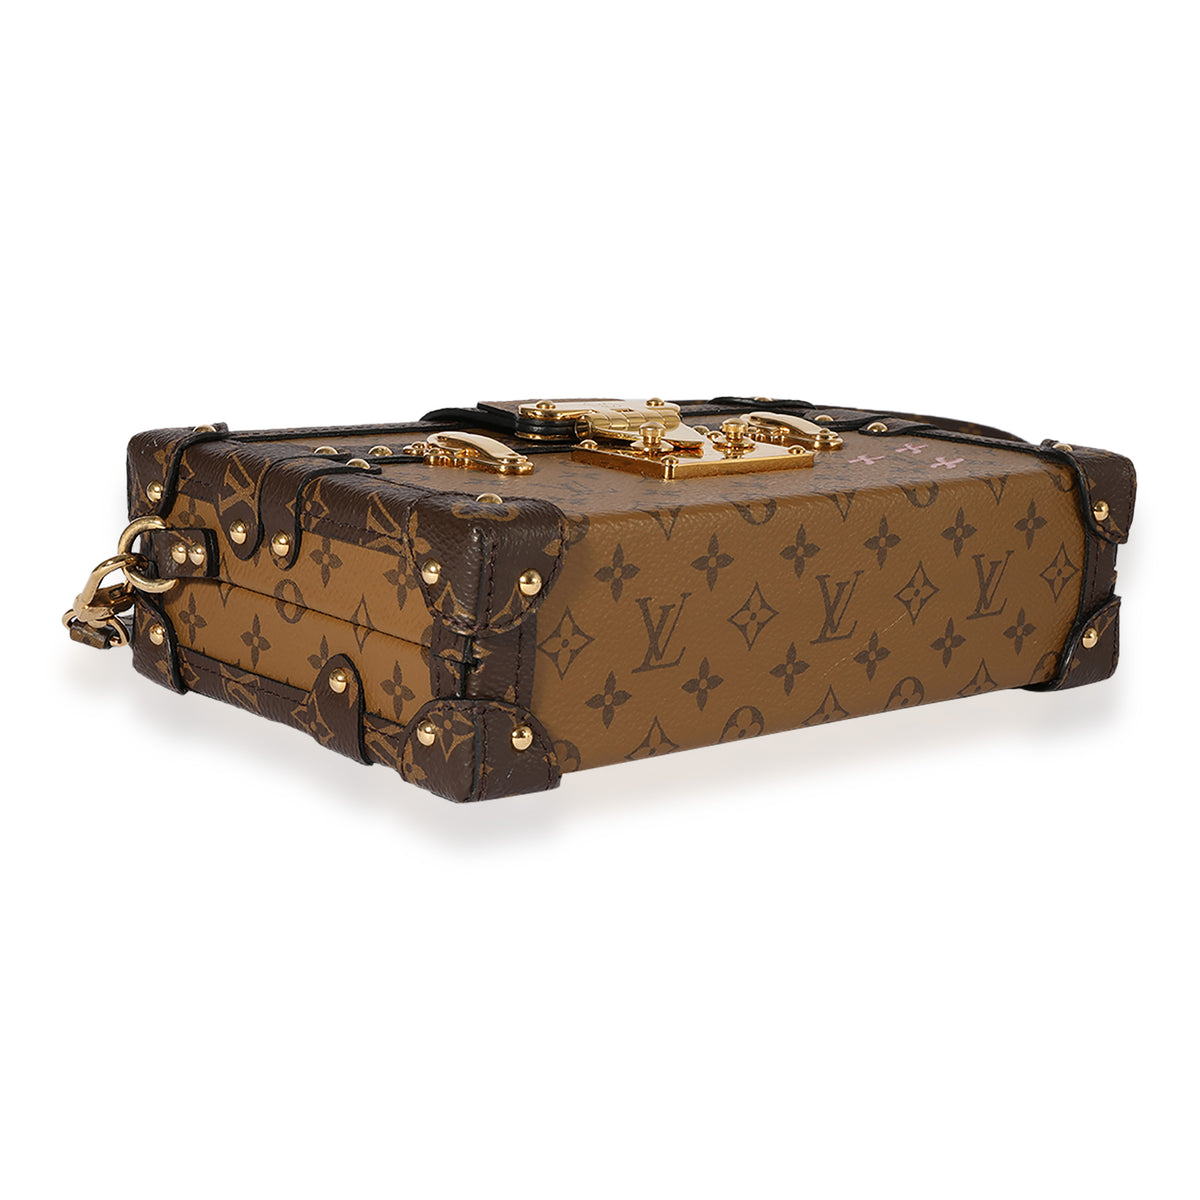 Louis Vuitton Mother-of-Pearl Petite Malle Cross-Body Bag